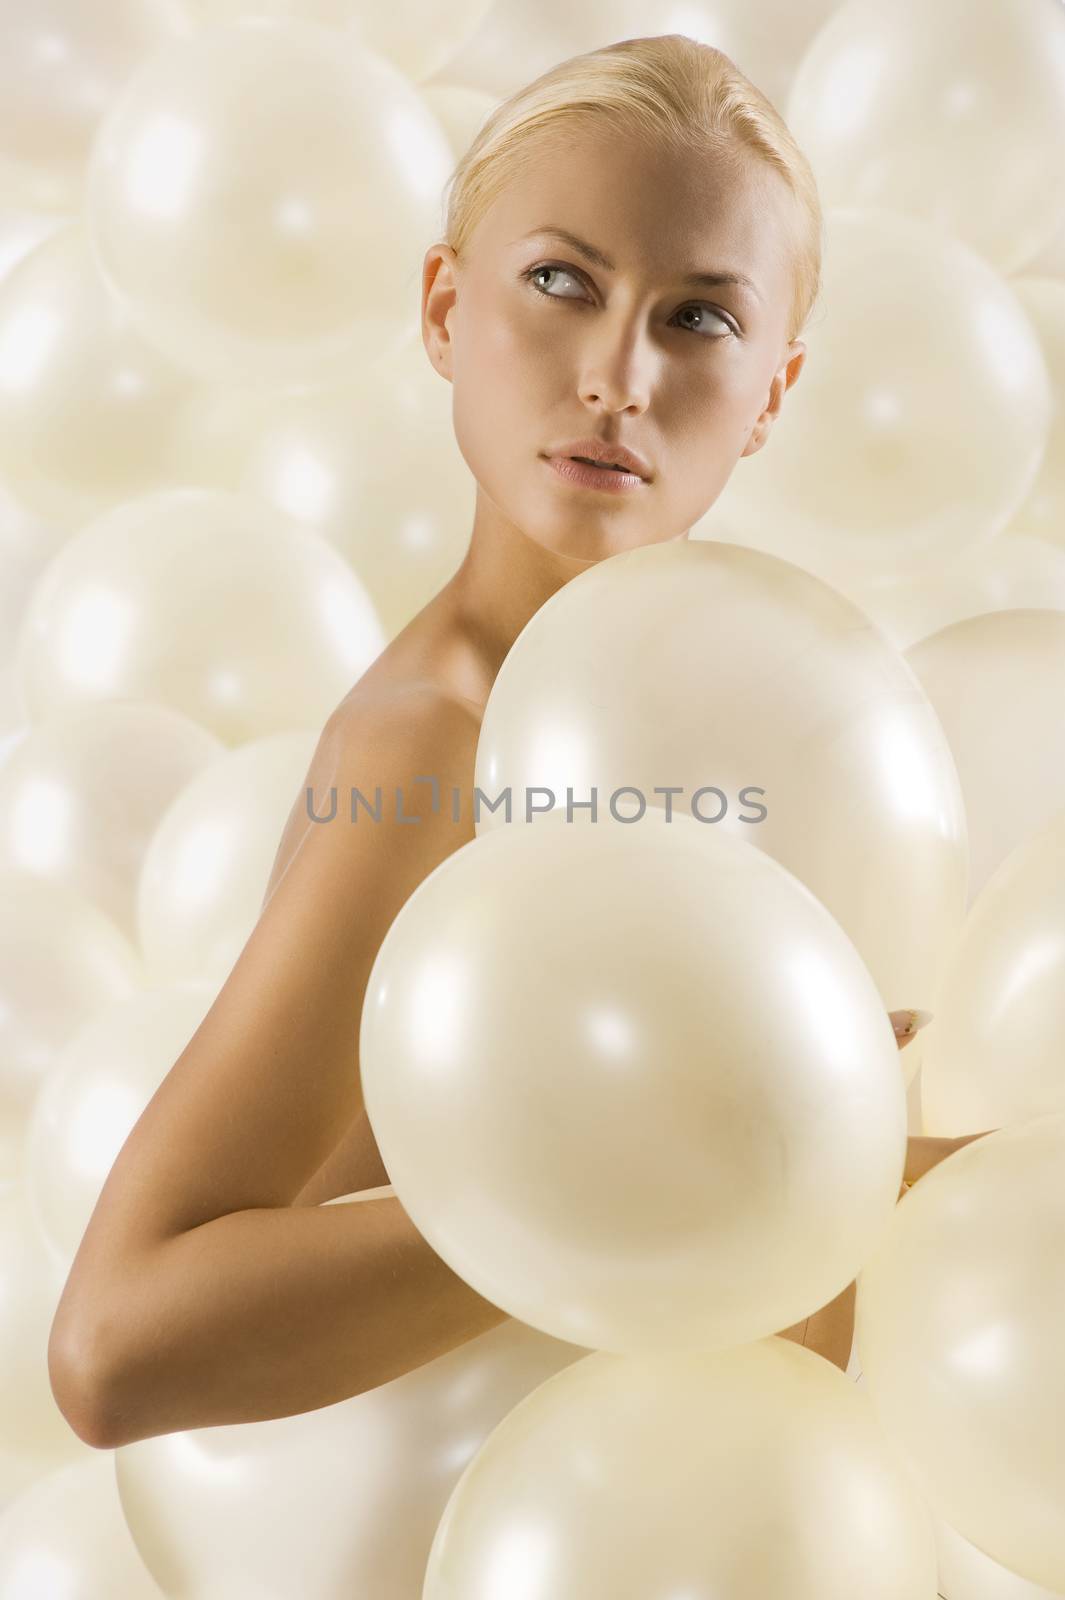 studio shot portrait os beautiful blond woman covering her body with white balloons